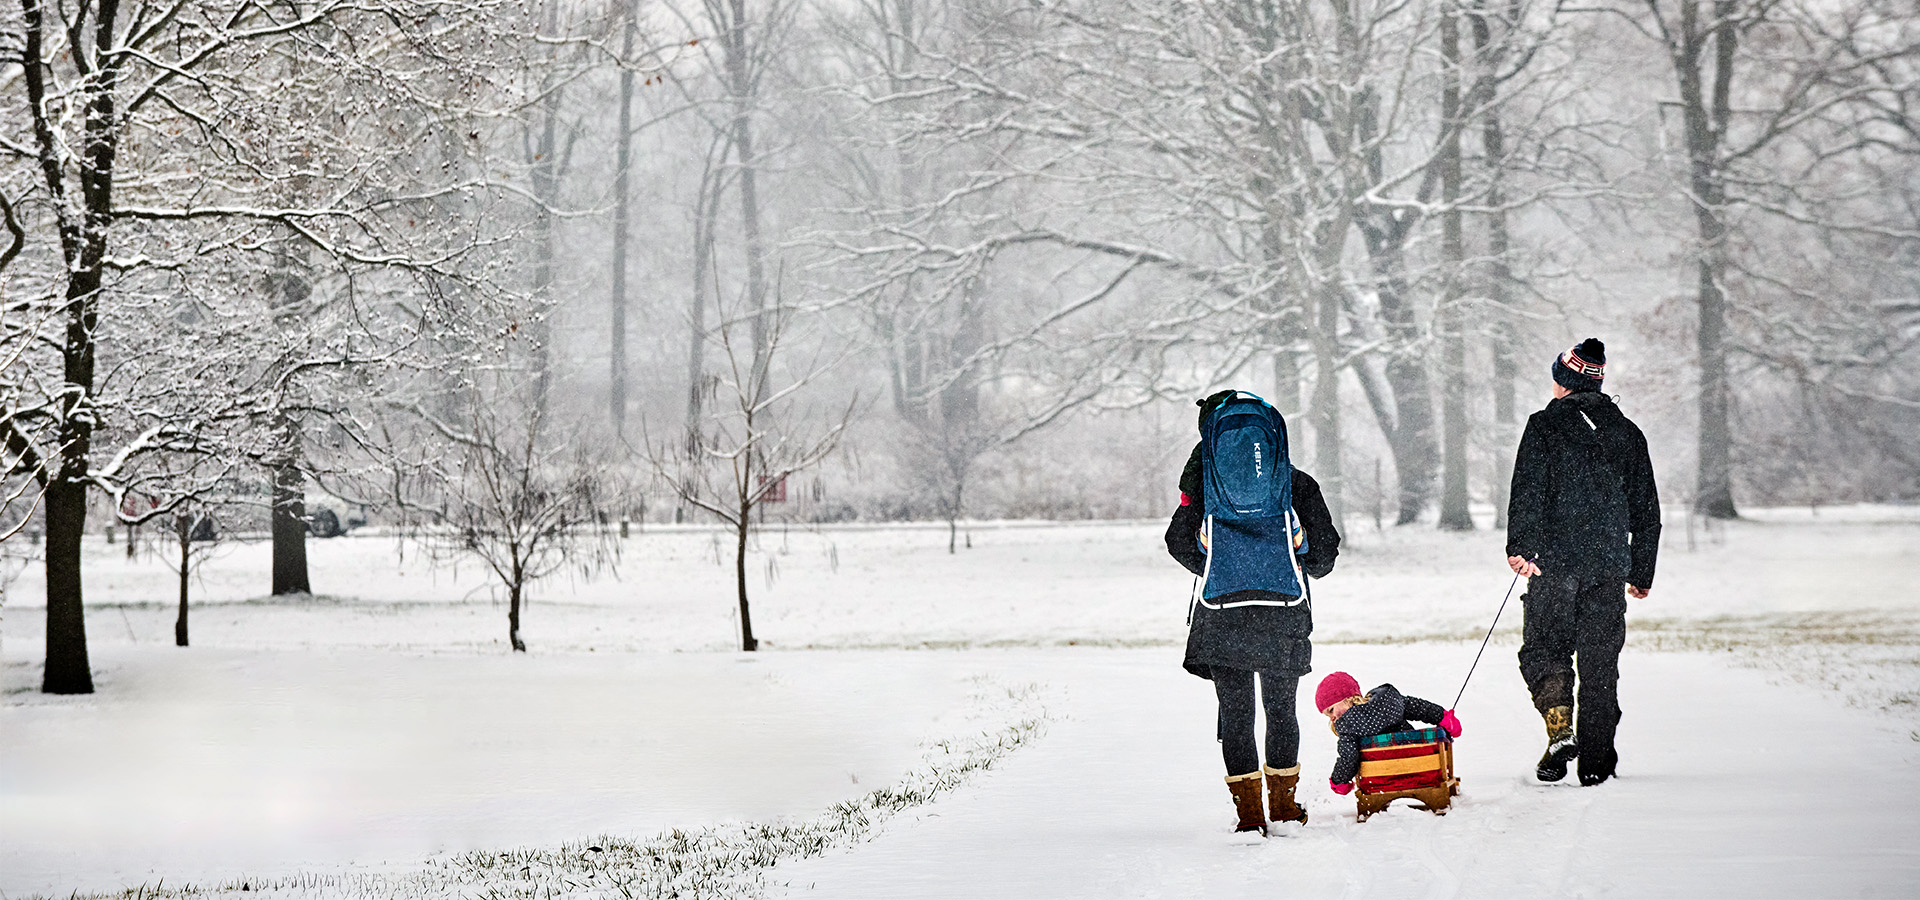 A young family walking on a snowy path, pulling a young child in a sled.